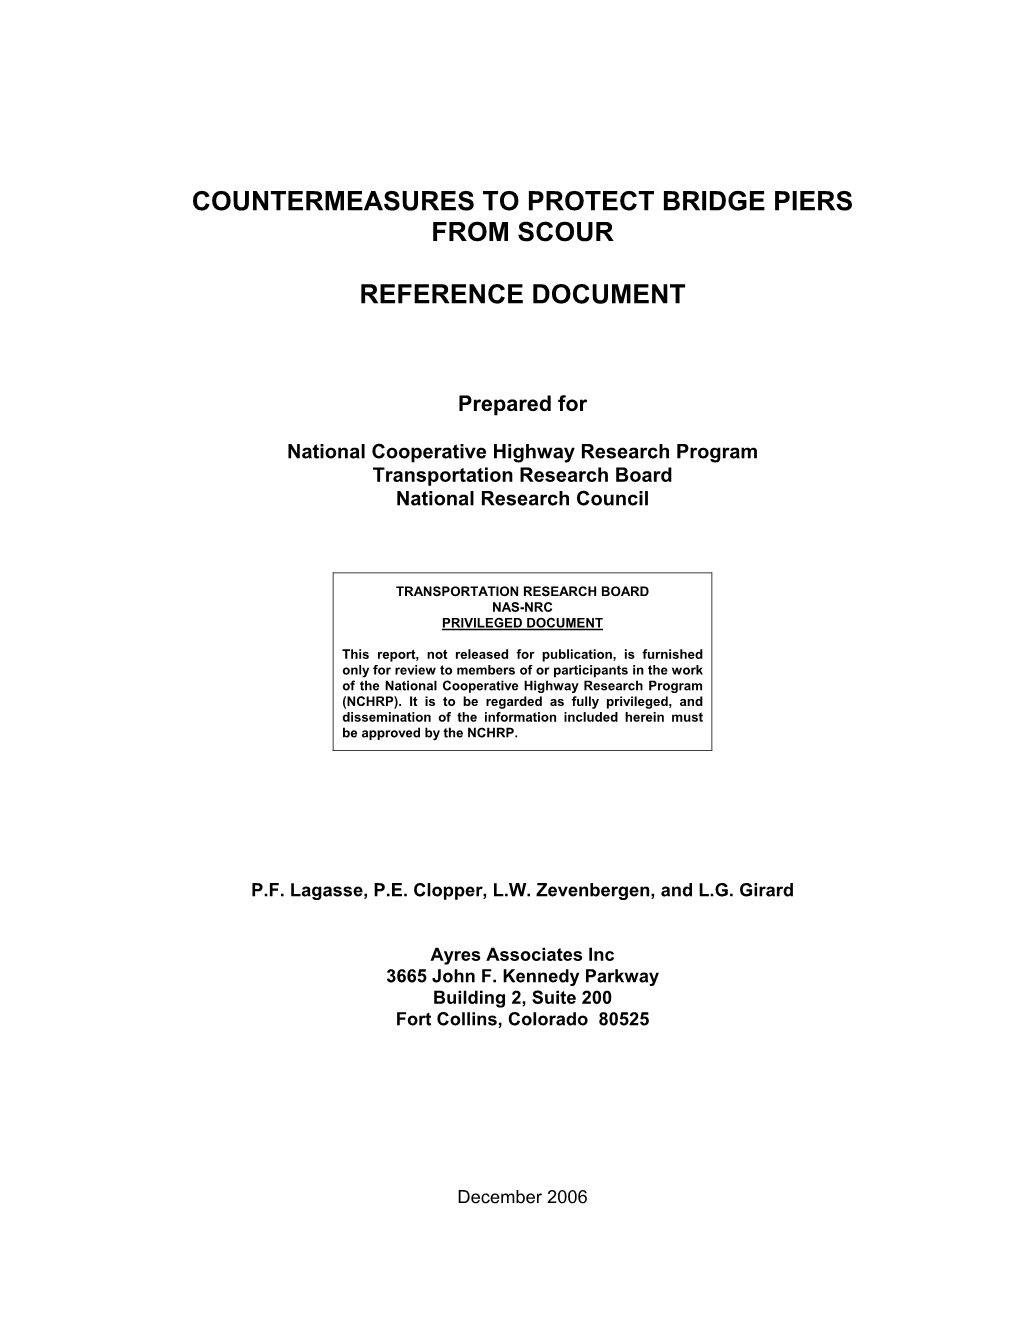 Countermeasures to Protect Bridge Piers from Scour Reference